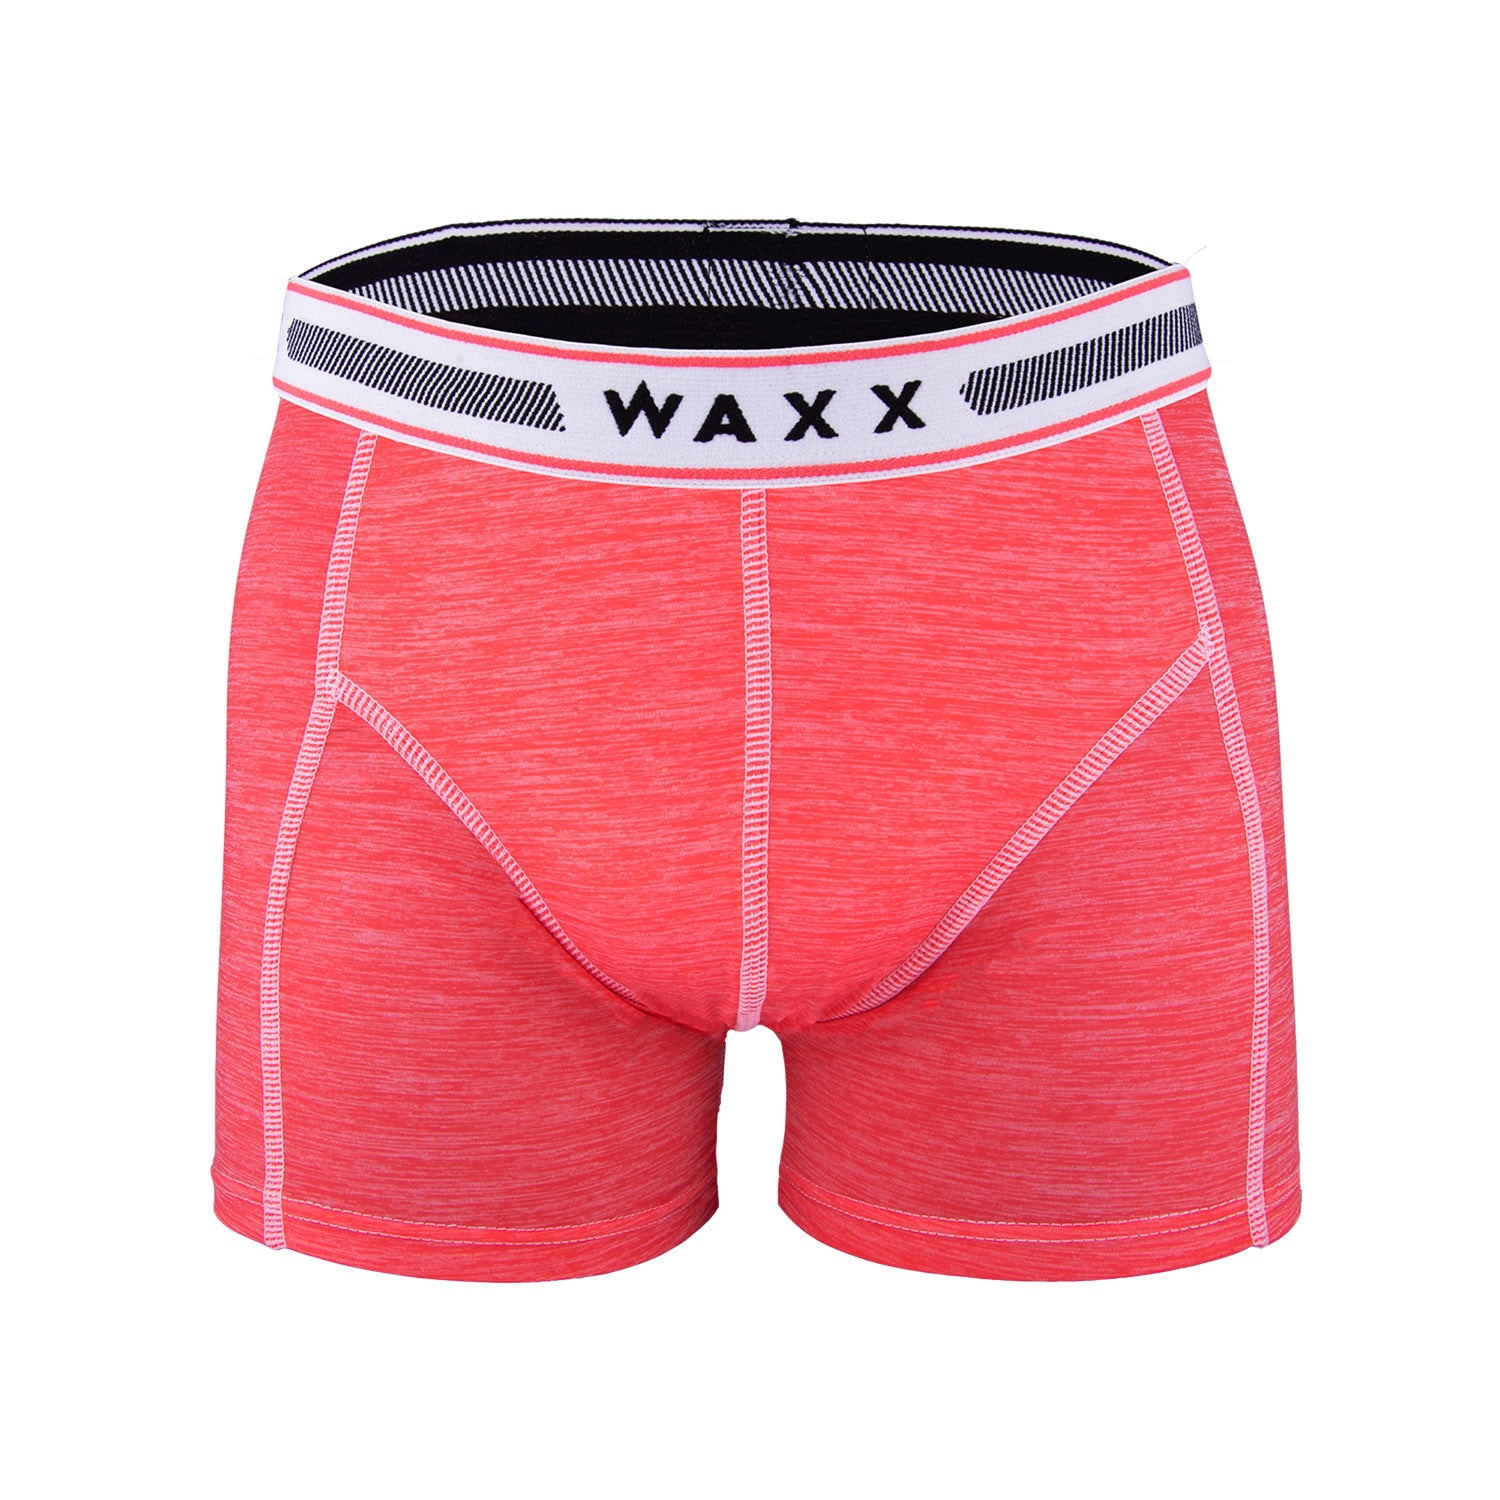 Waxx Boxers in Coral